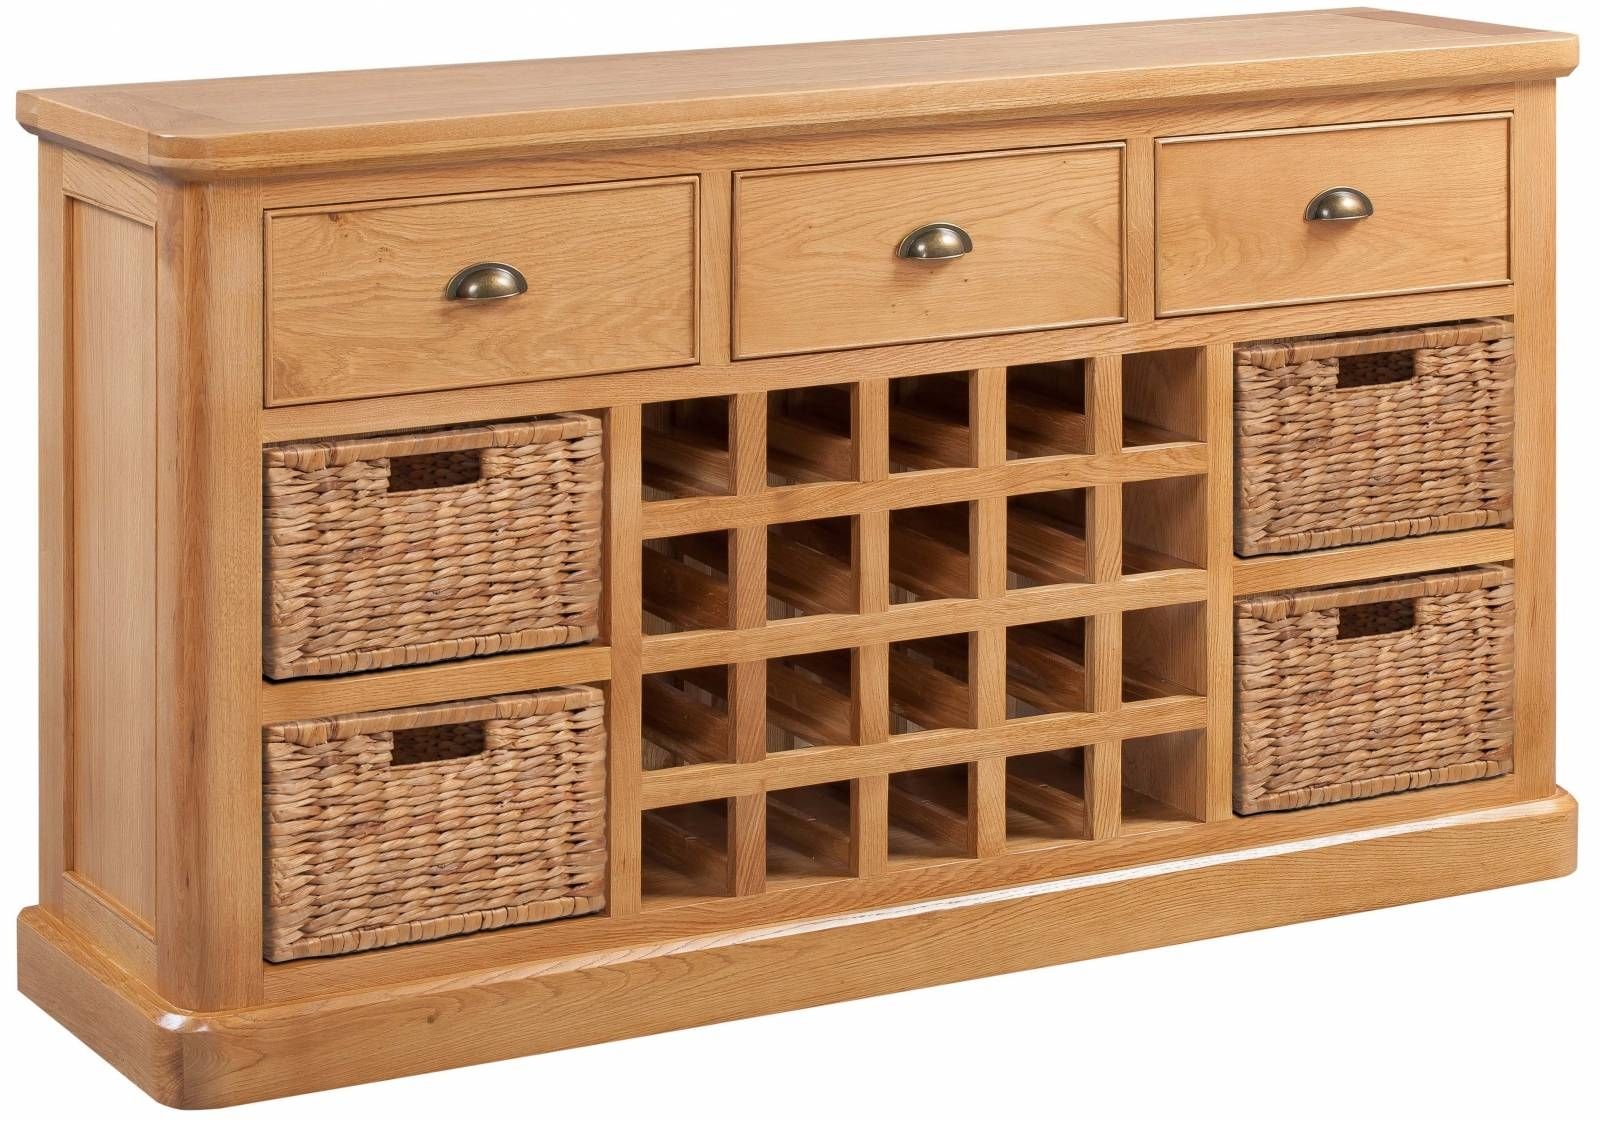 Oak Open Sideboard With Wine Rack – Oak Sideboards For The Kitchen Within Oak Sideboards With Wine Rack (View 13 of 30)